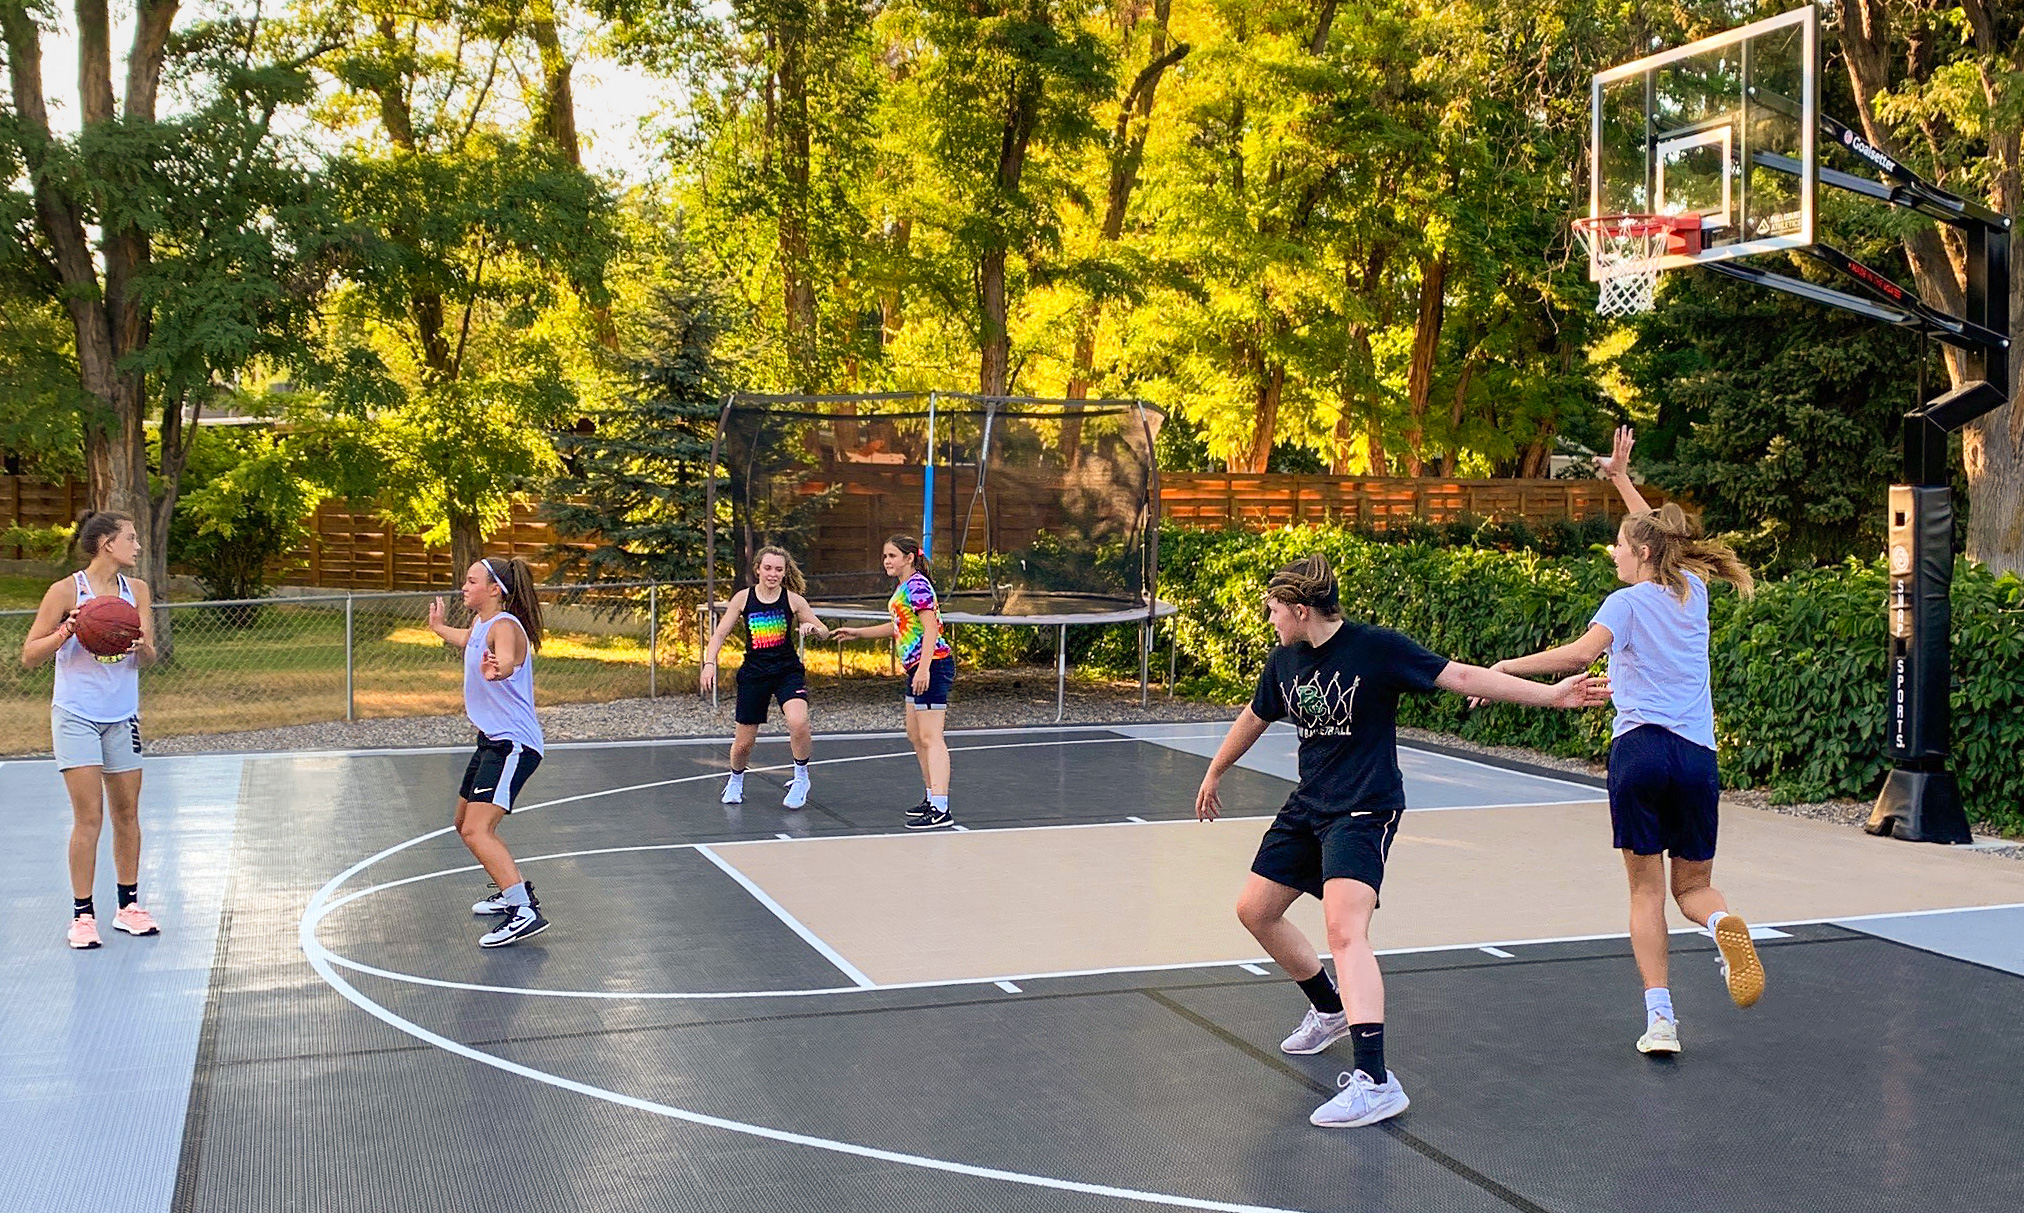 Mastering the Court: A Comprehensive Guide to Basketball Skills and Techniques